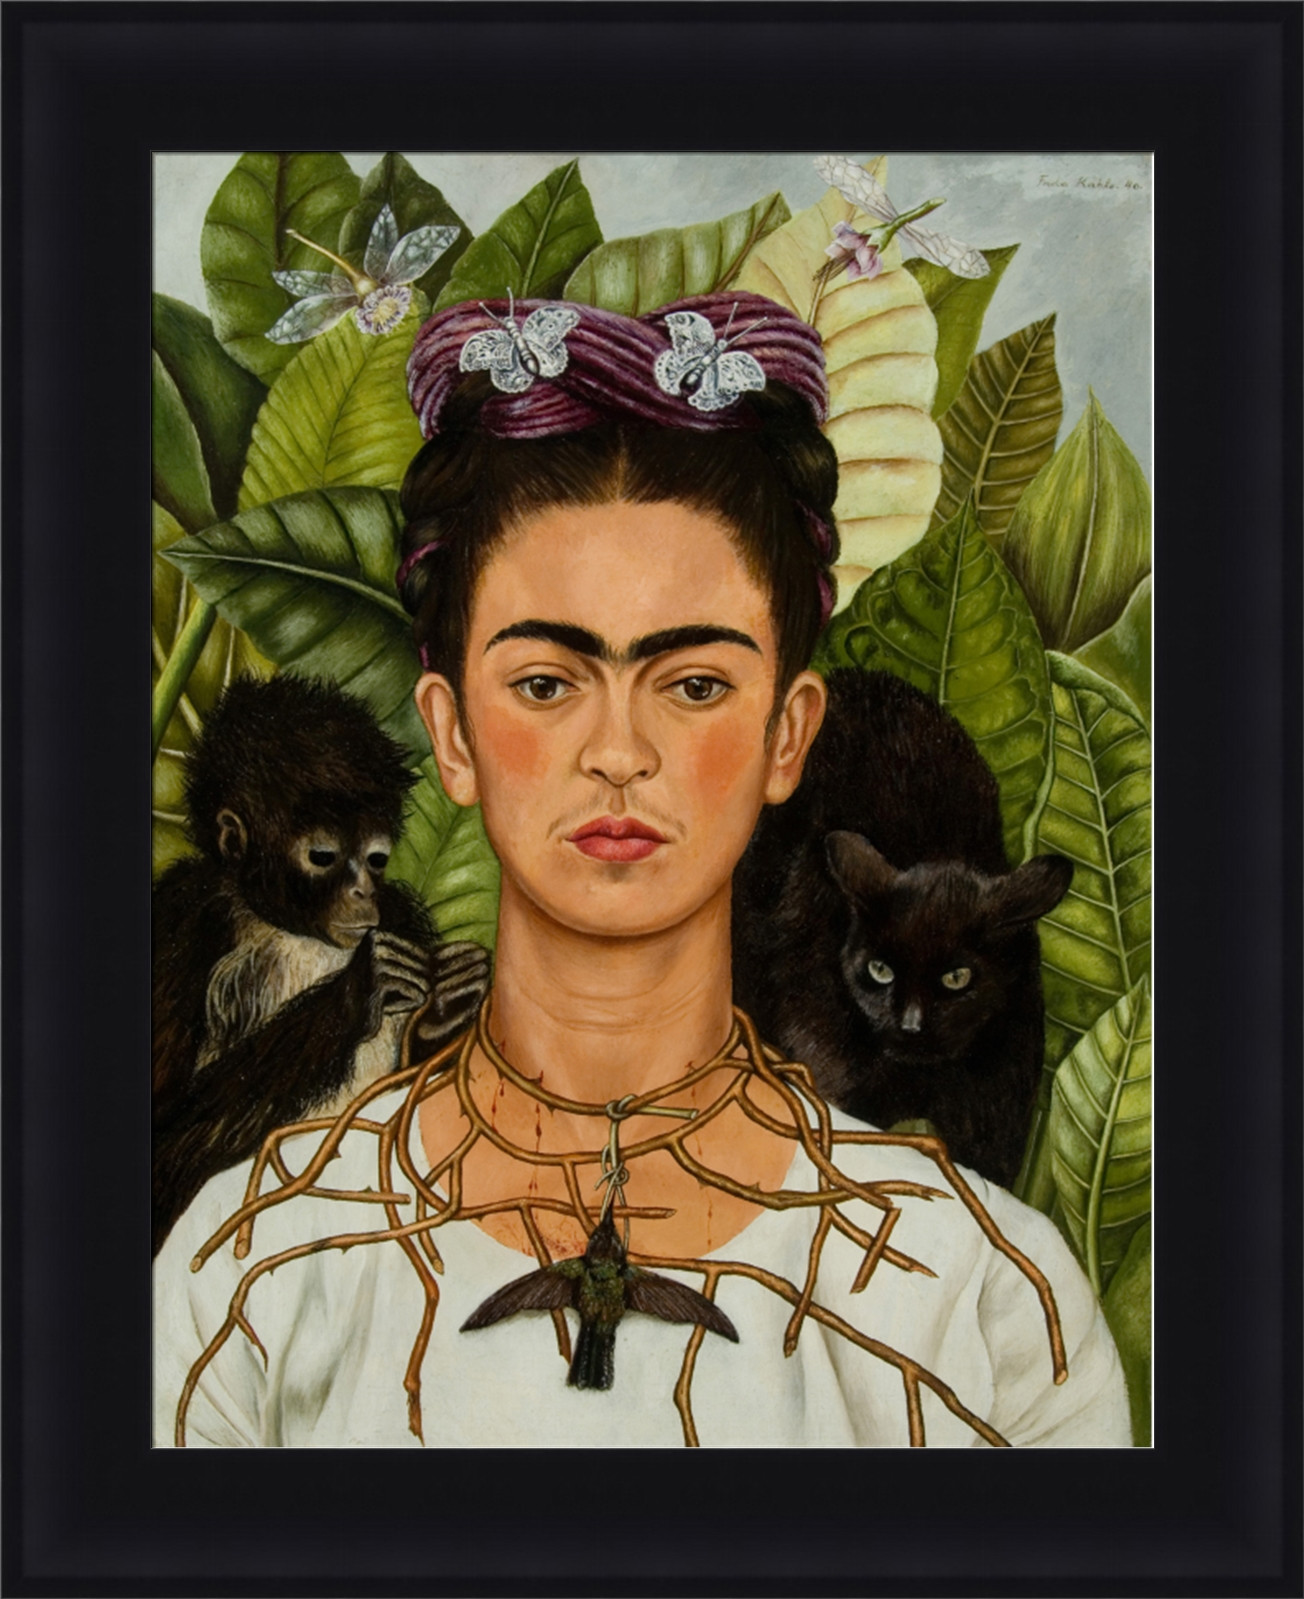 Frida Kahlo Self Portrait With Thorn Necklace And Hummingbird
 Frida Kahlo Self Portrait with Thorn Necklace and